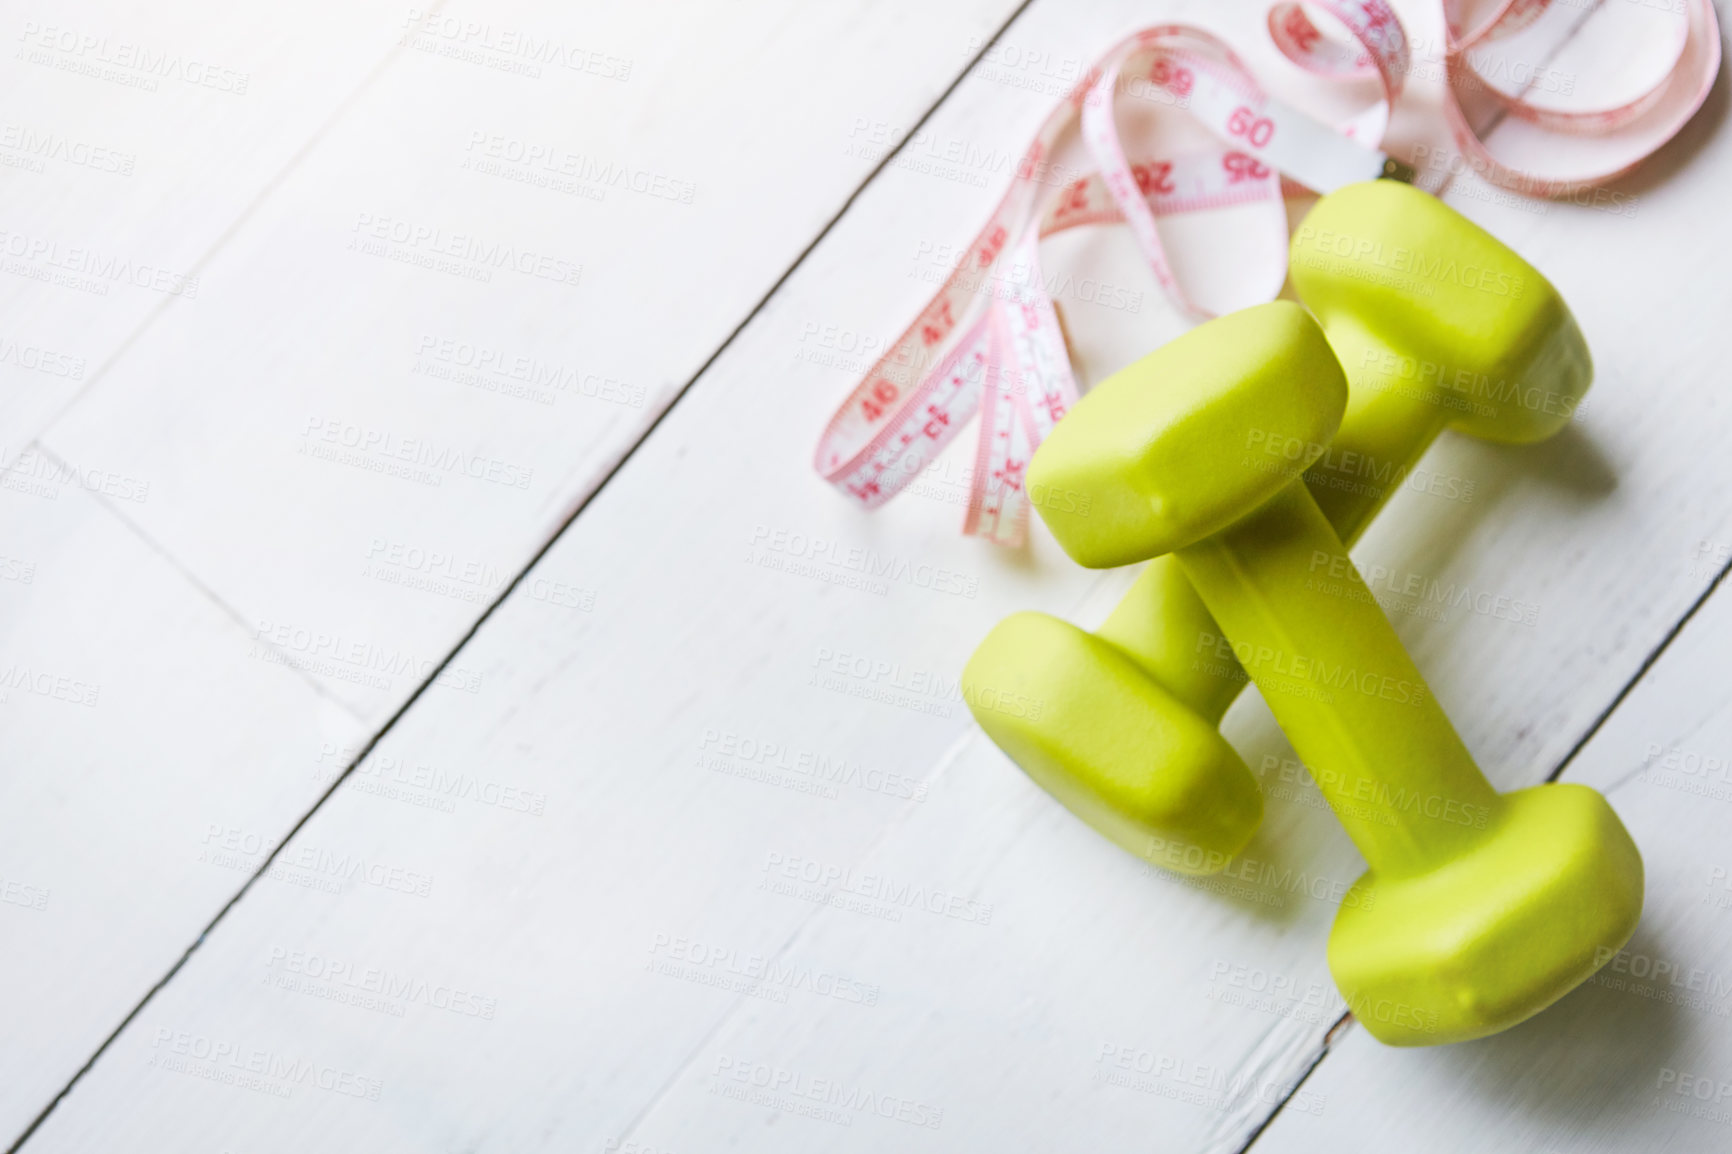 Buy stock photo Shot of dumbbells and a measuring tape on a table